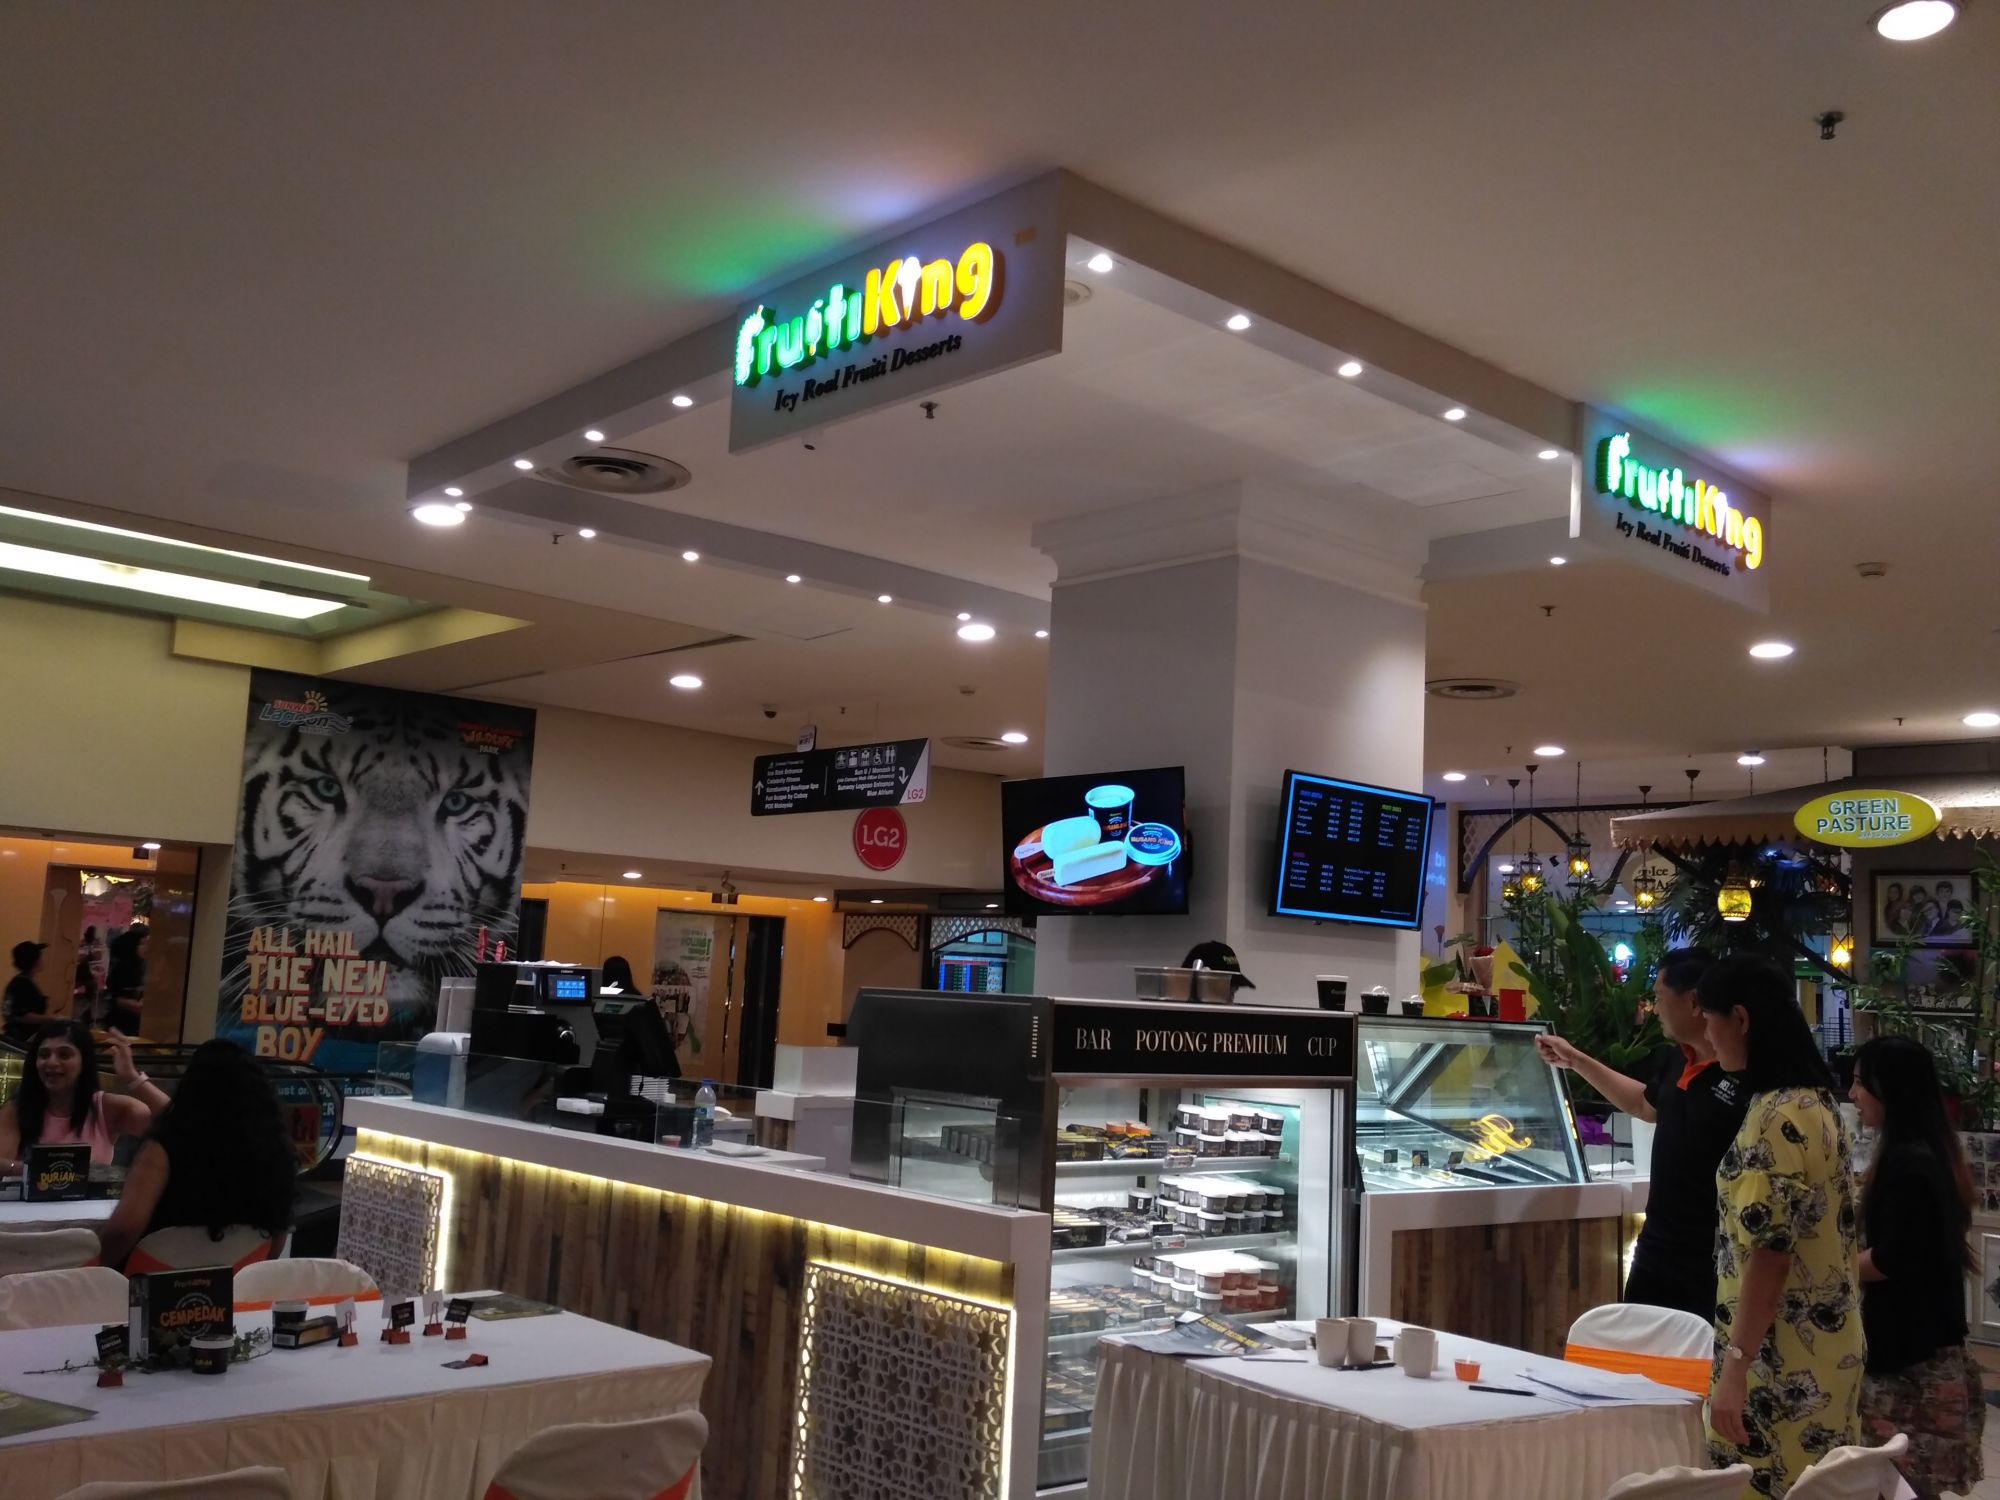 Fruiti King outlet